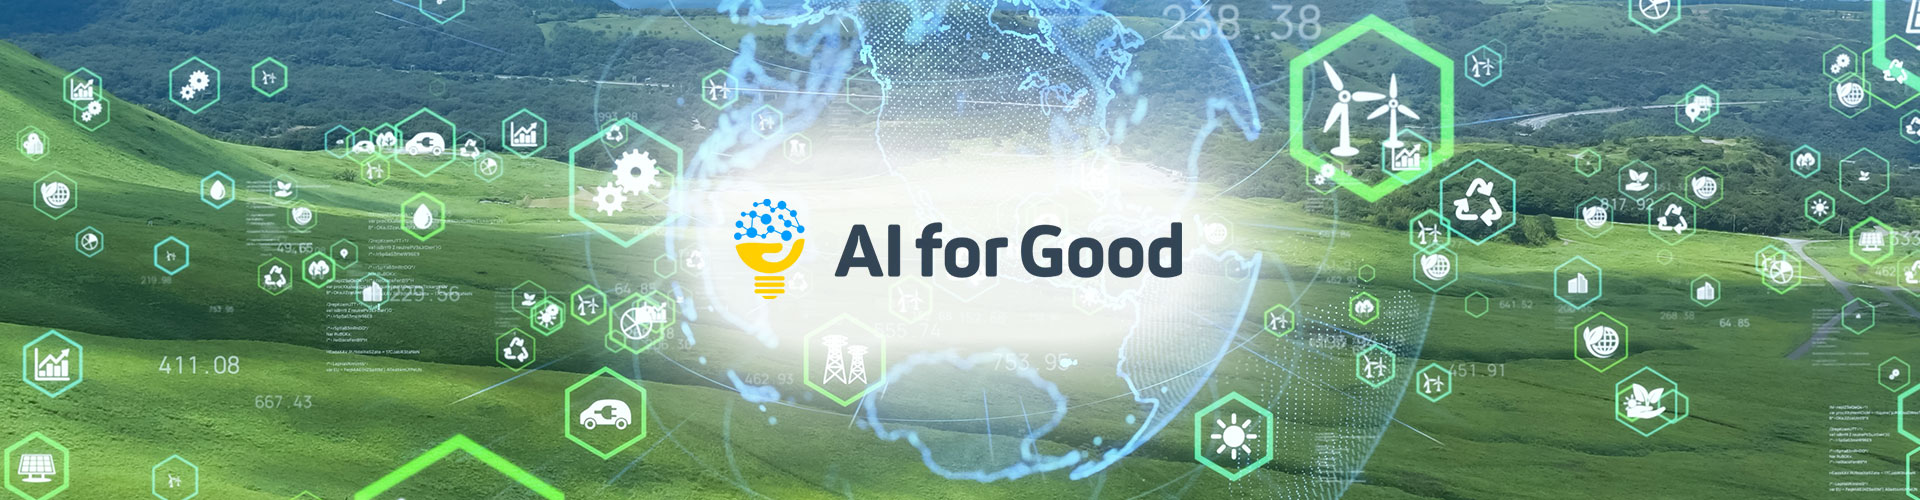 Ai for Good Banner